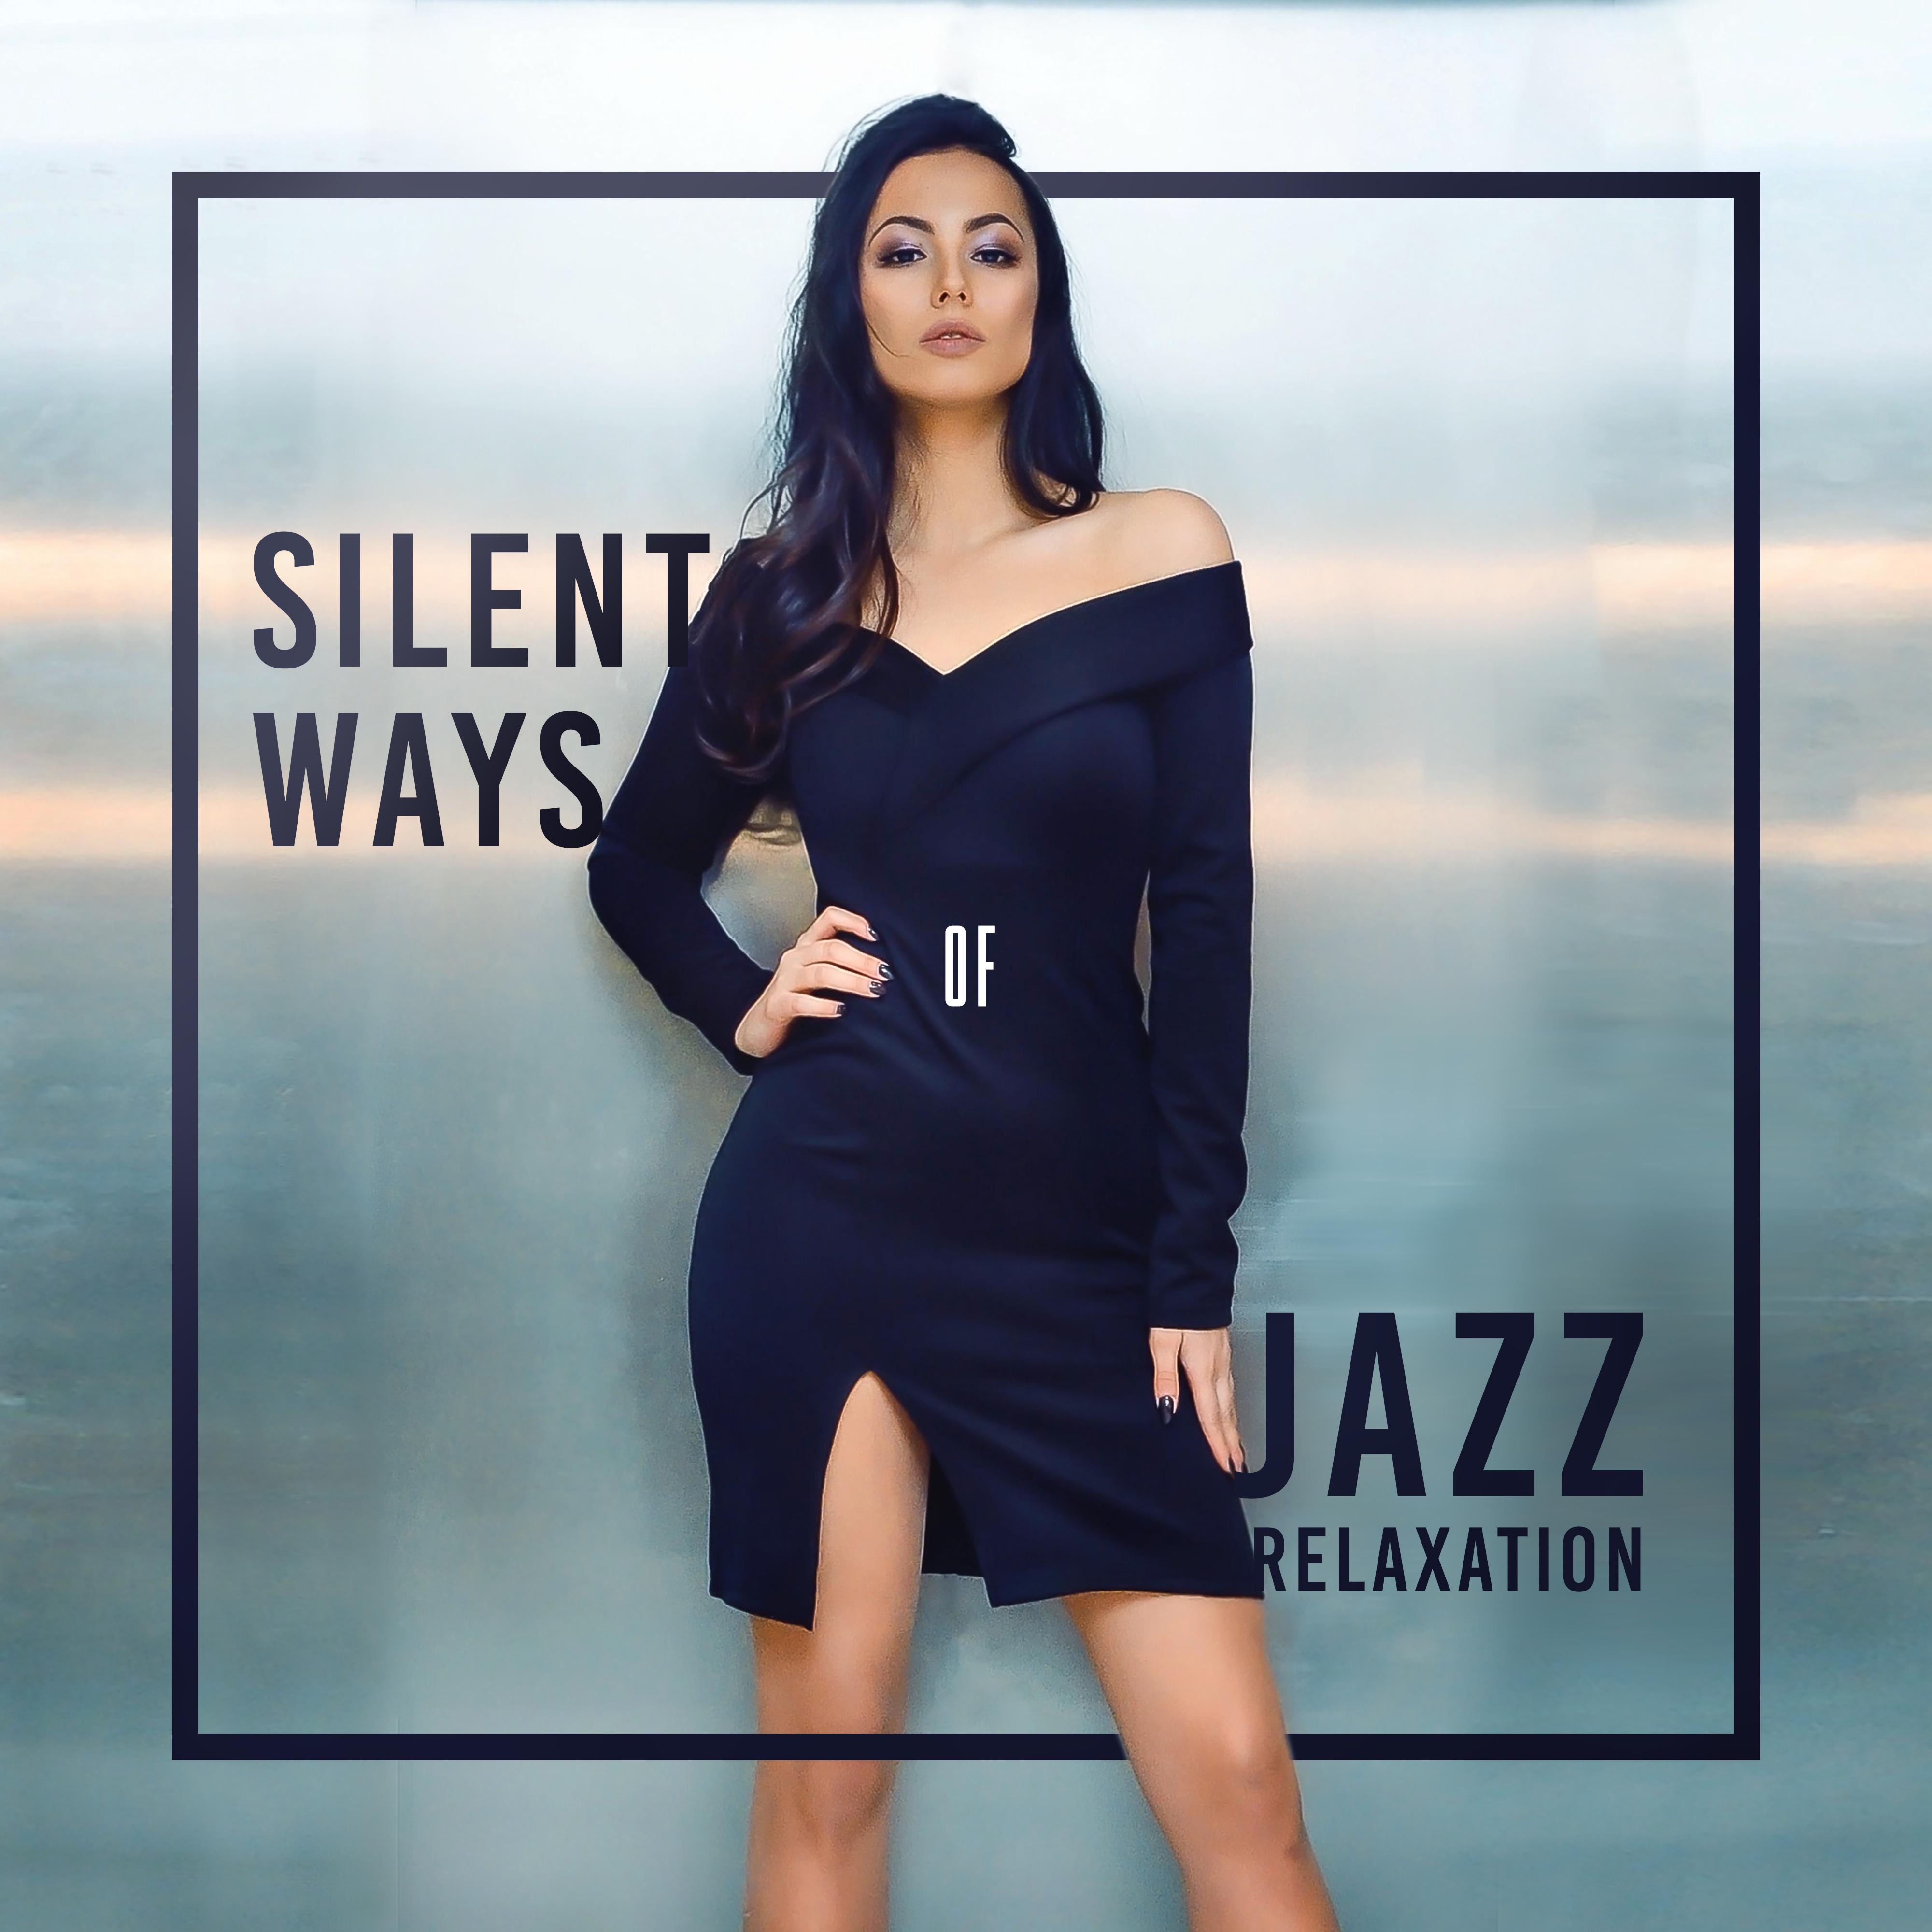 Silent Ways of Jazz Relaxation: Top 2019 Smooth Jazz Soft Music for Relaxing, Calming Down, Stress Relief Sounds, Rest After Tough Day